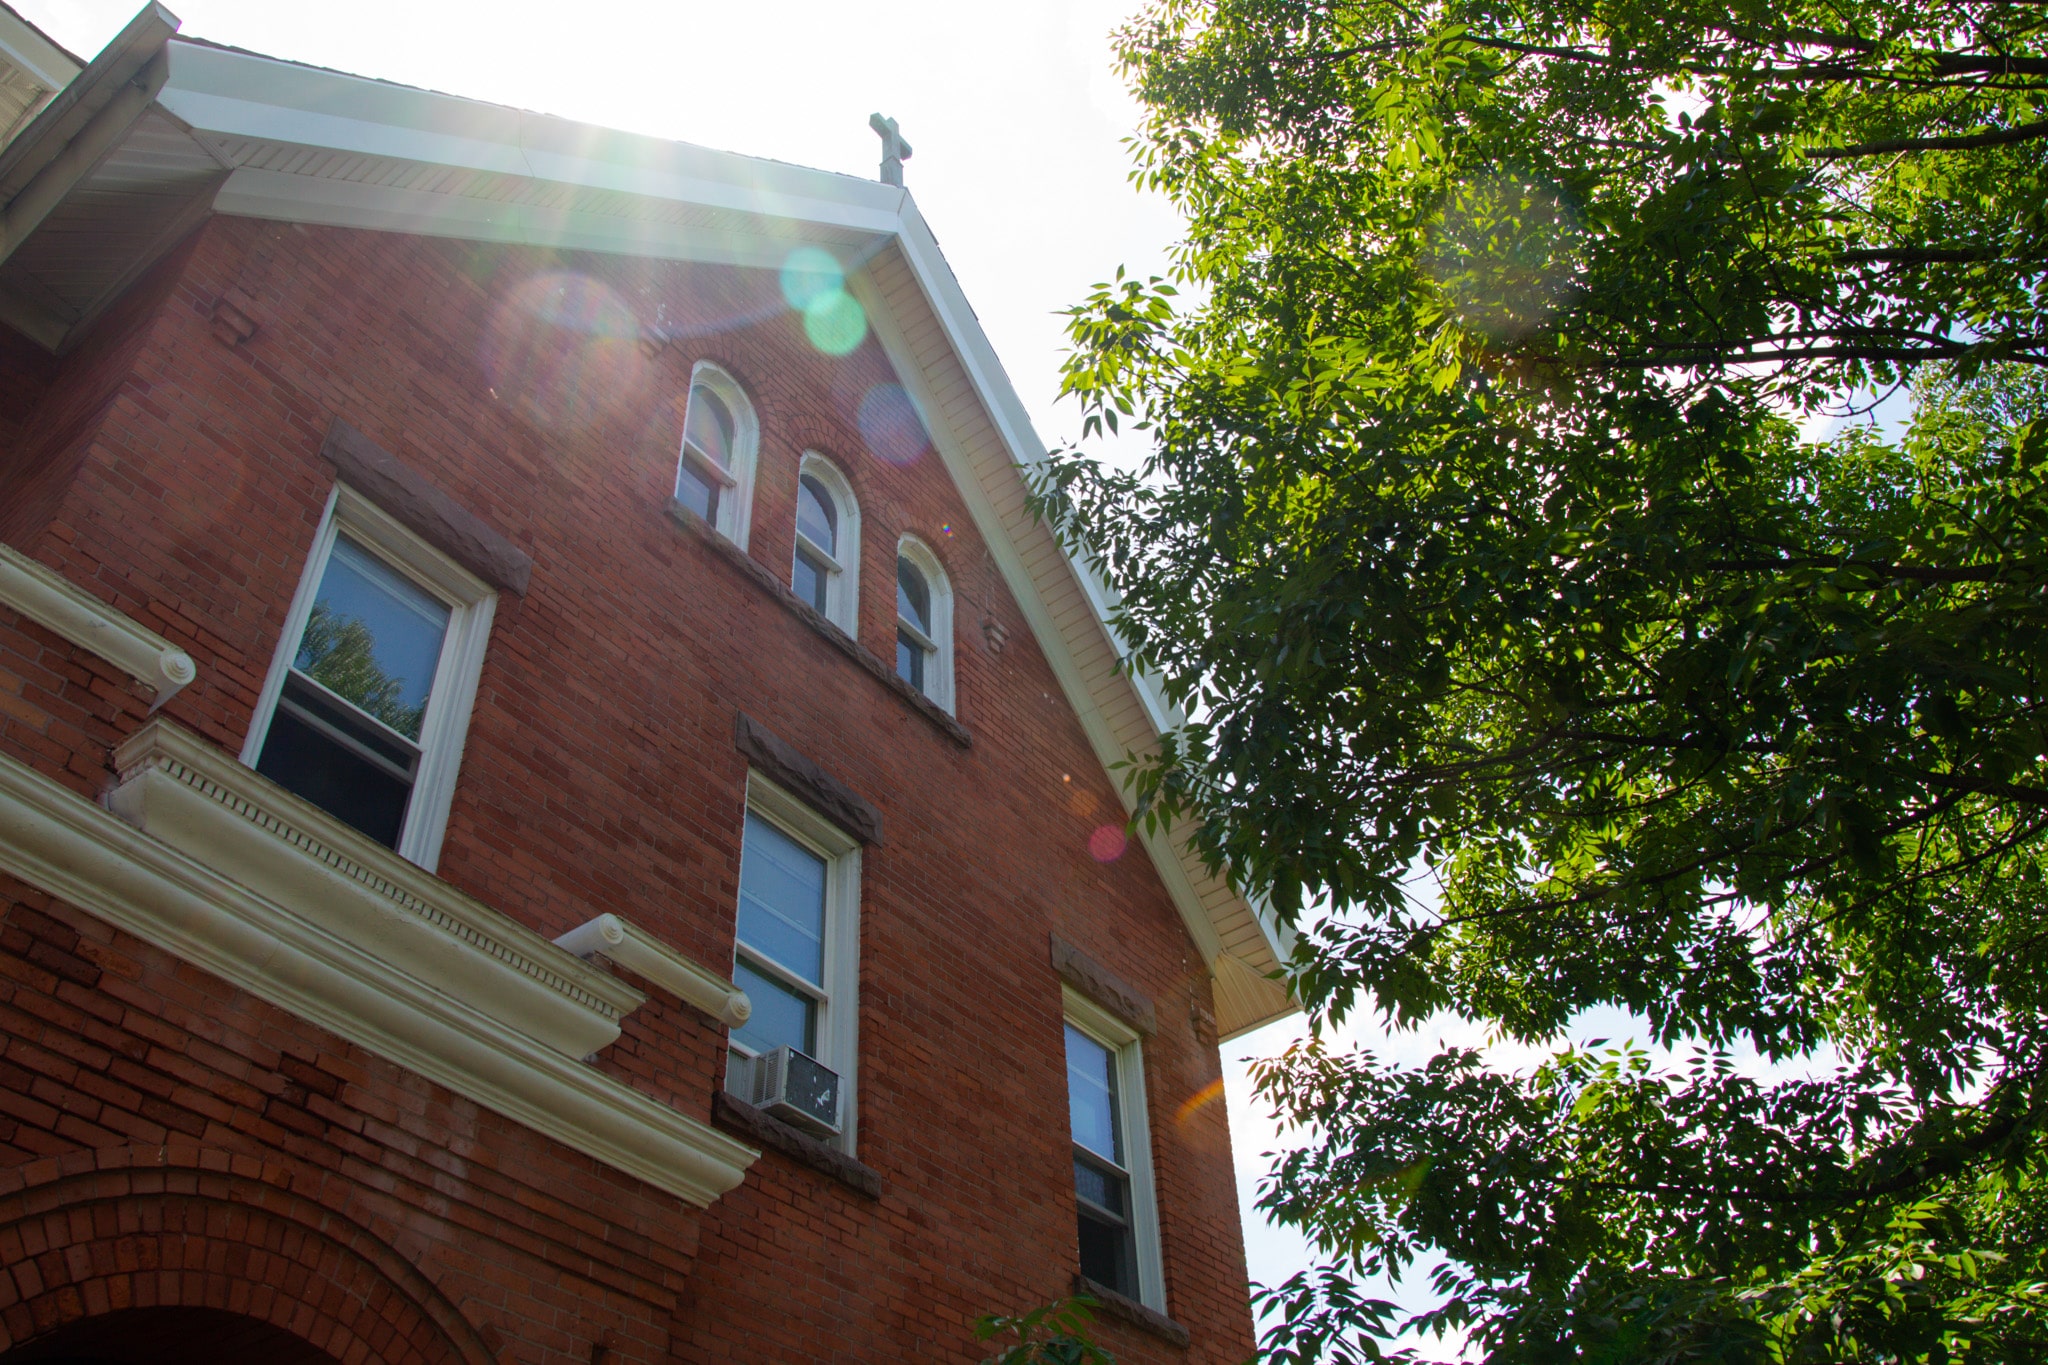 Recovery Houses is based on Alphonse Street in a former church and convent.